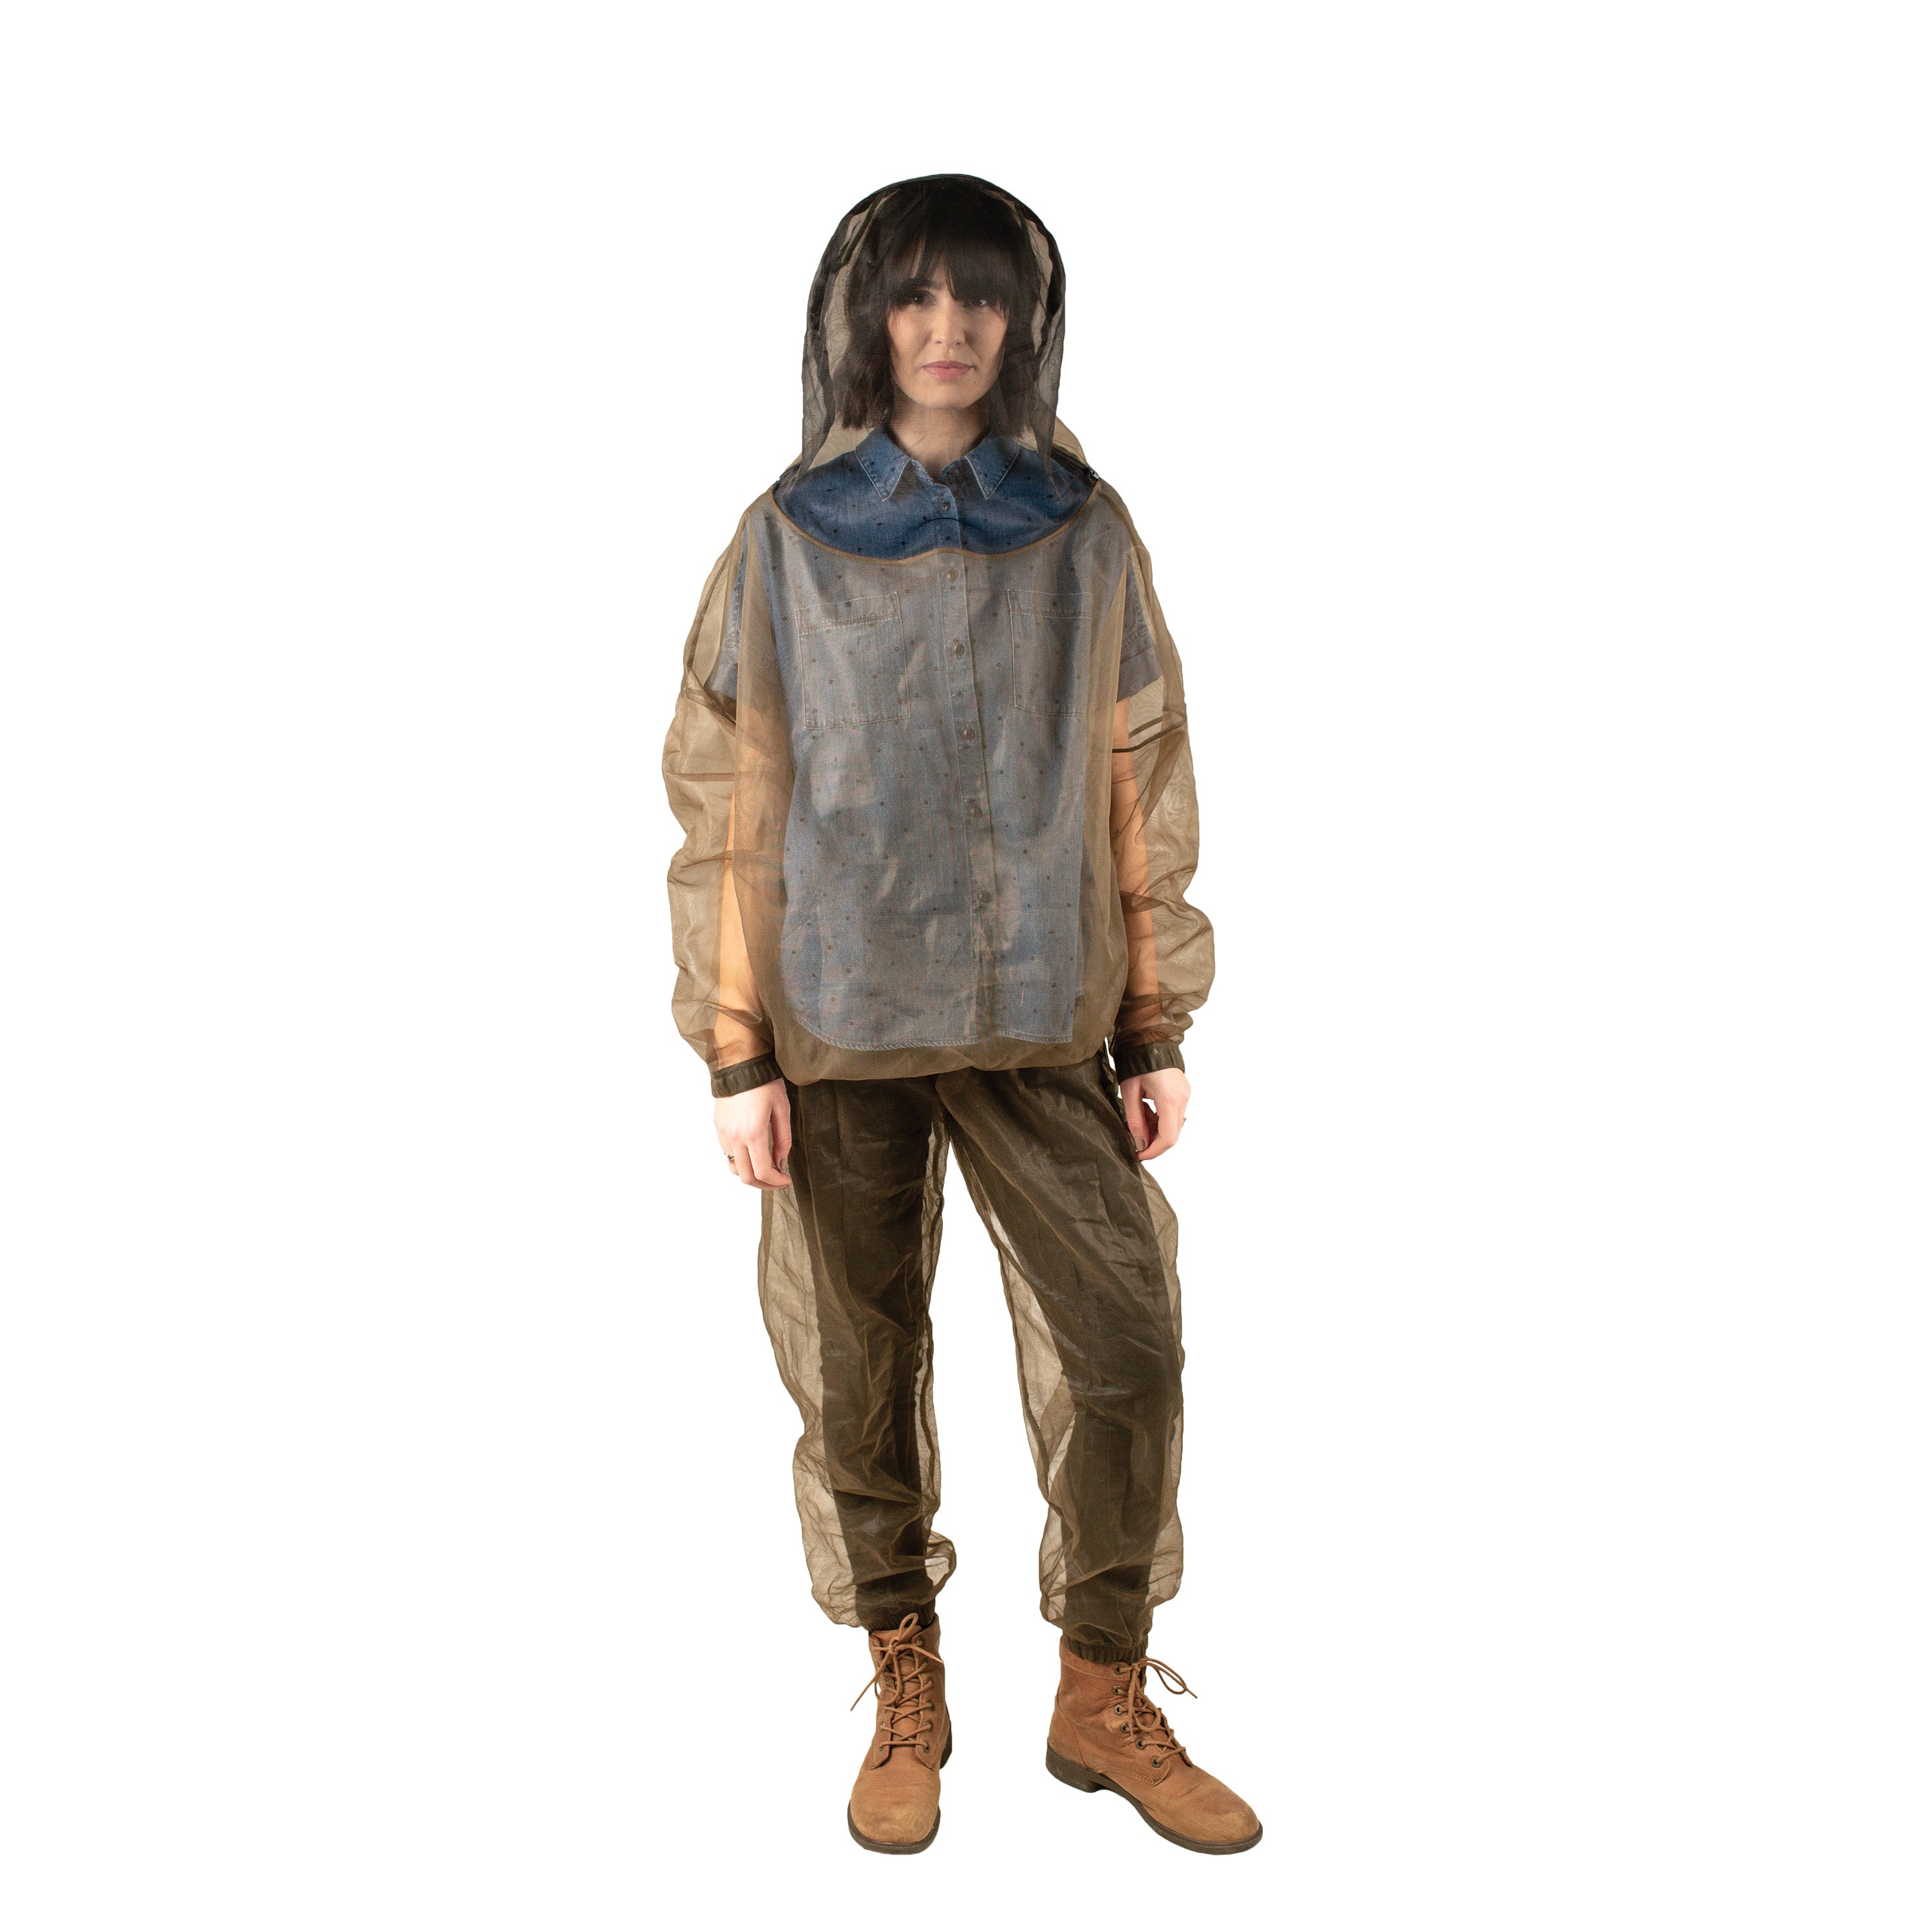 Mosquito Suit L/Xl-eSafety Supplies, Inc